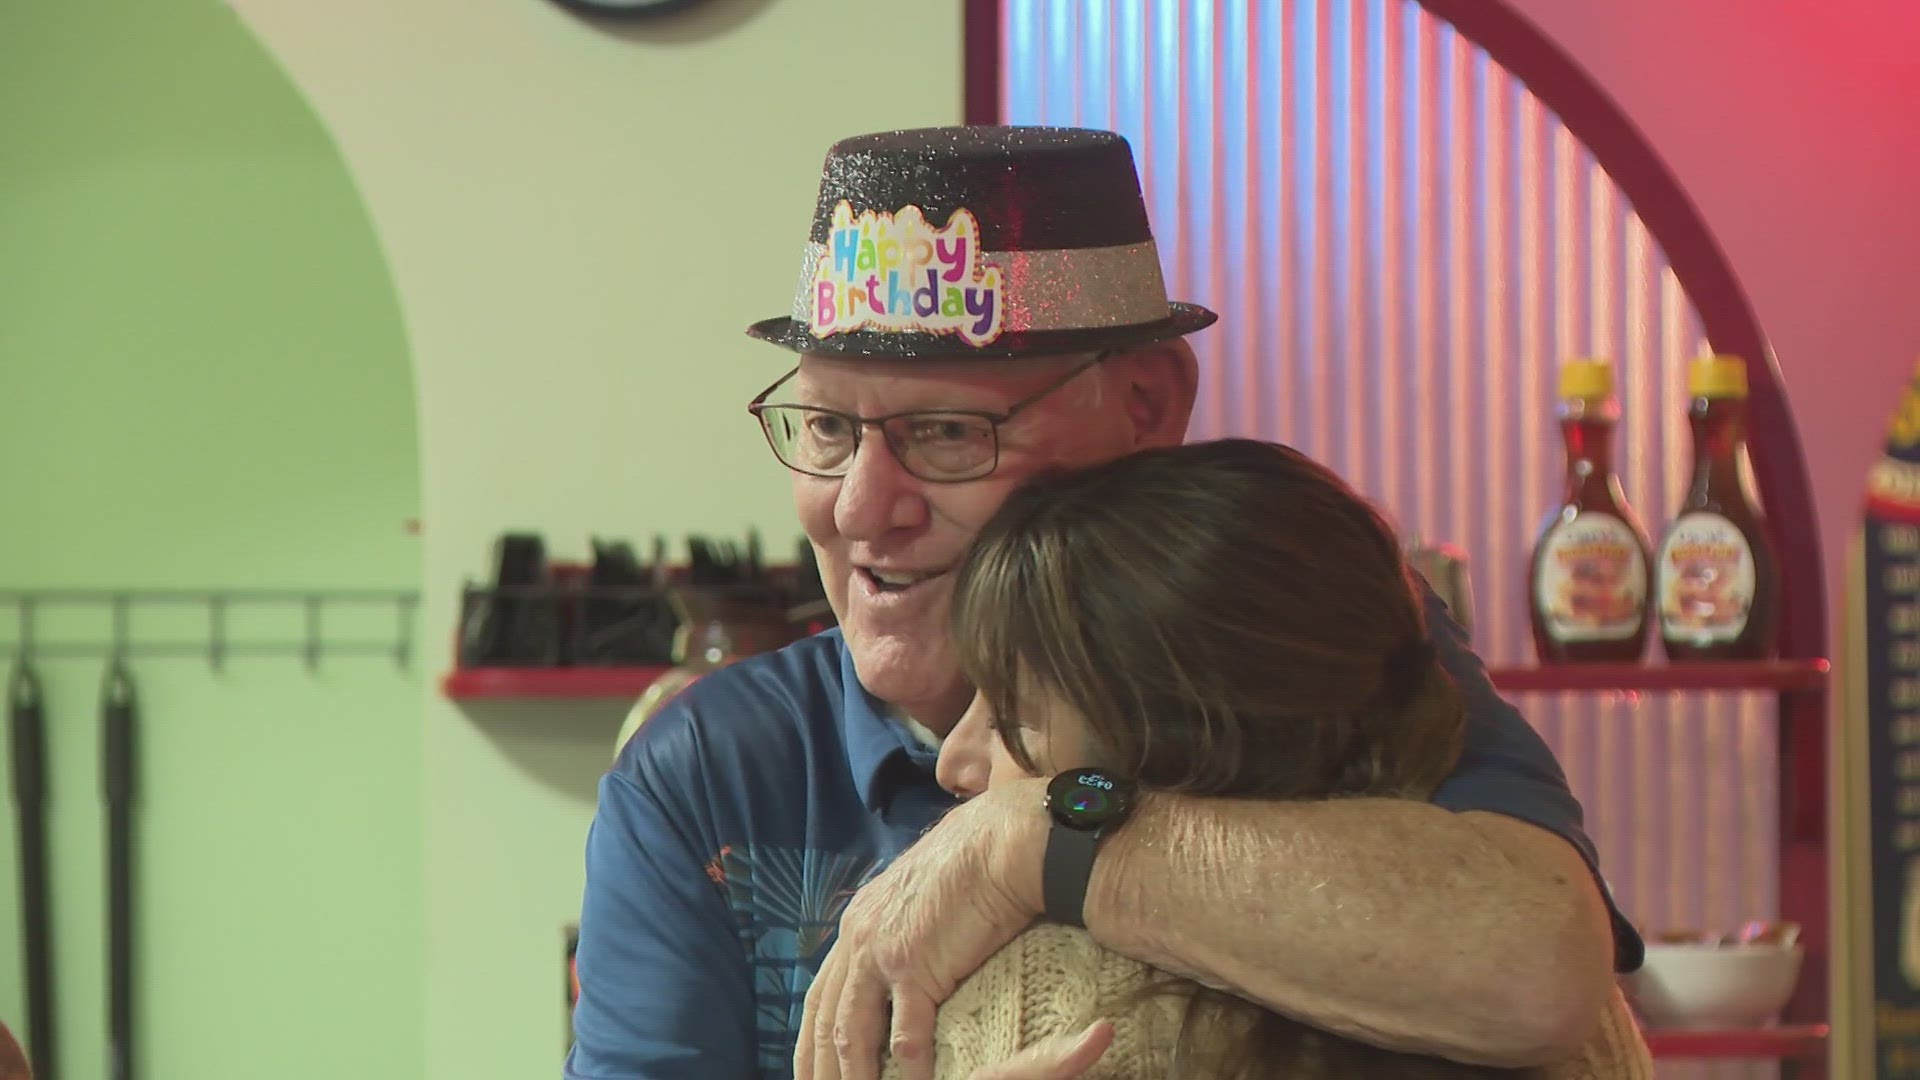 Bruce Duncan turned 86 years old. So, staff at Hogan's Diner decided to plan a surprise birthday for him.